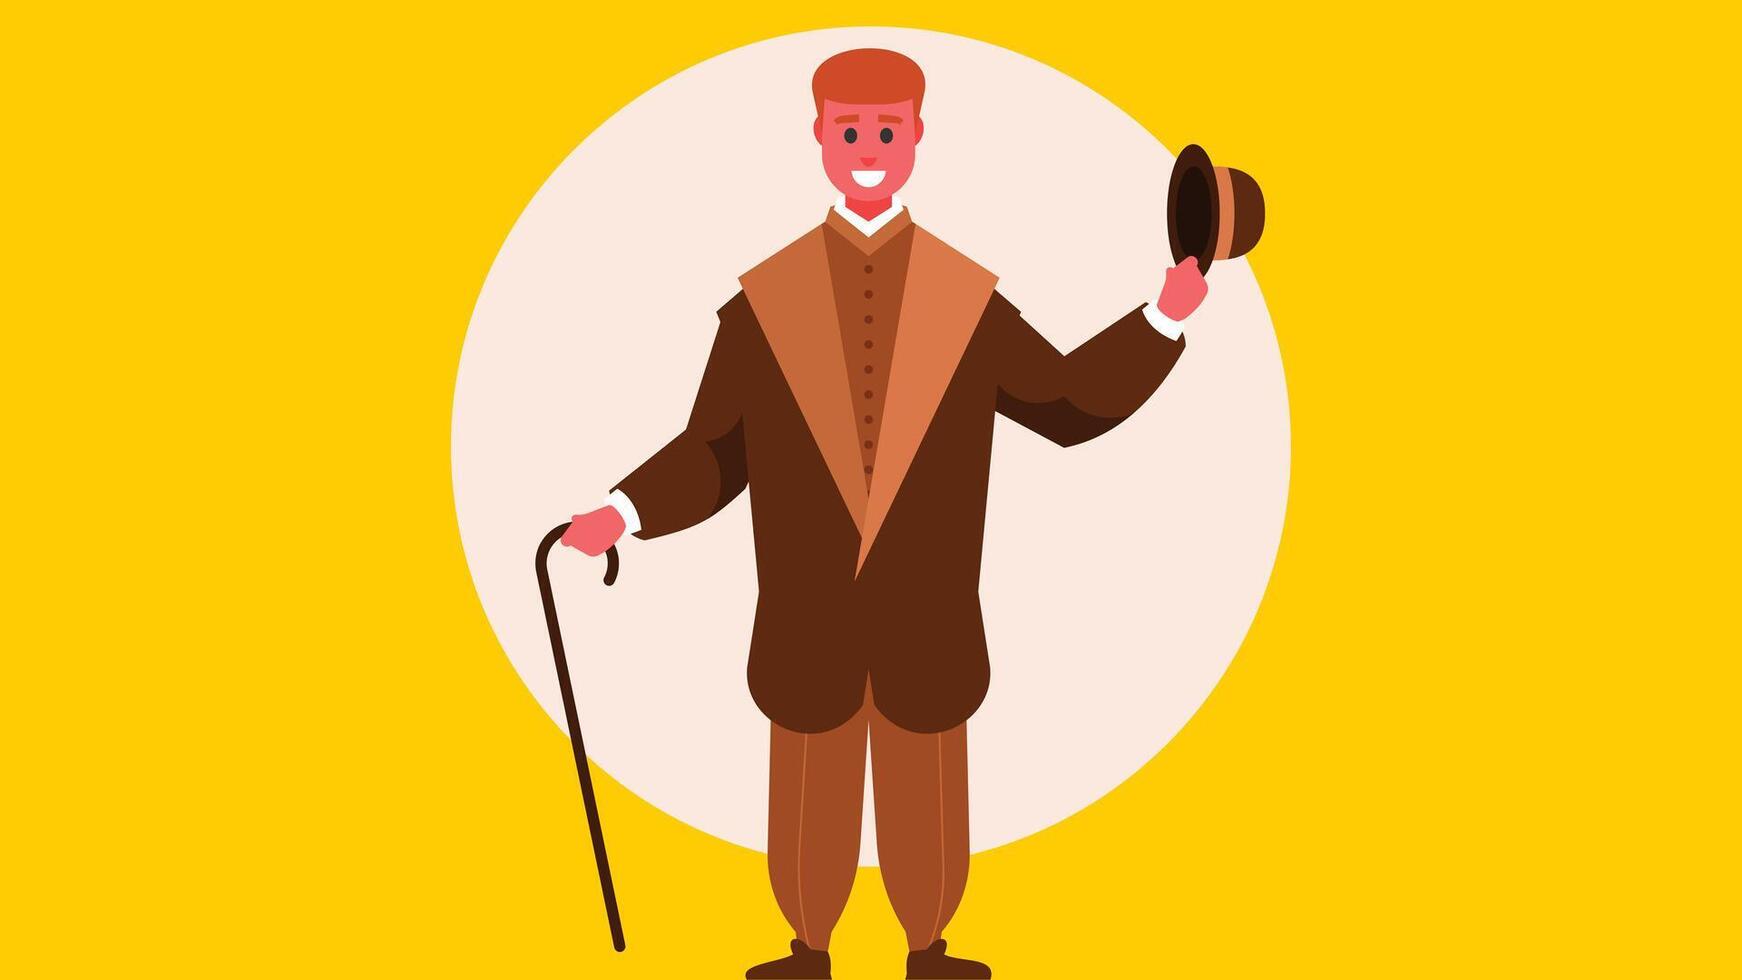 classic clothing gentleman holding his cap and walking stick vector